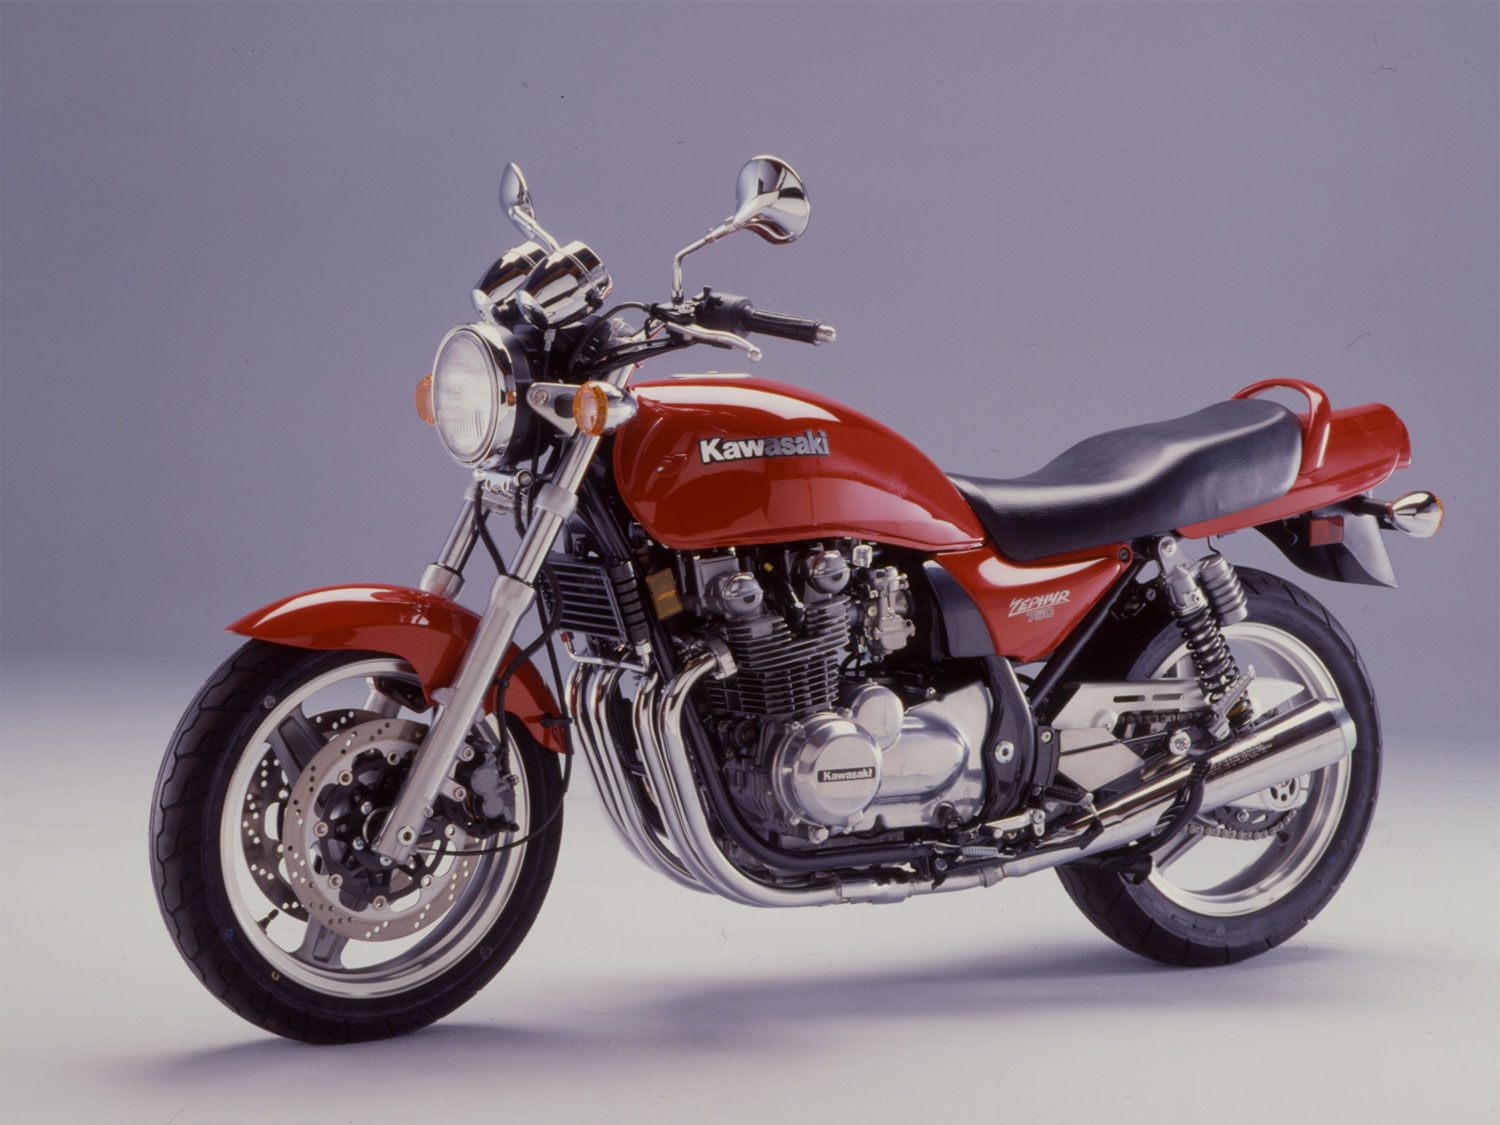 Focusing The Kawasaki Zephyr To Find If It Was The Ultimate 750 | Cycle World